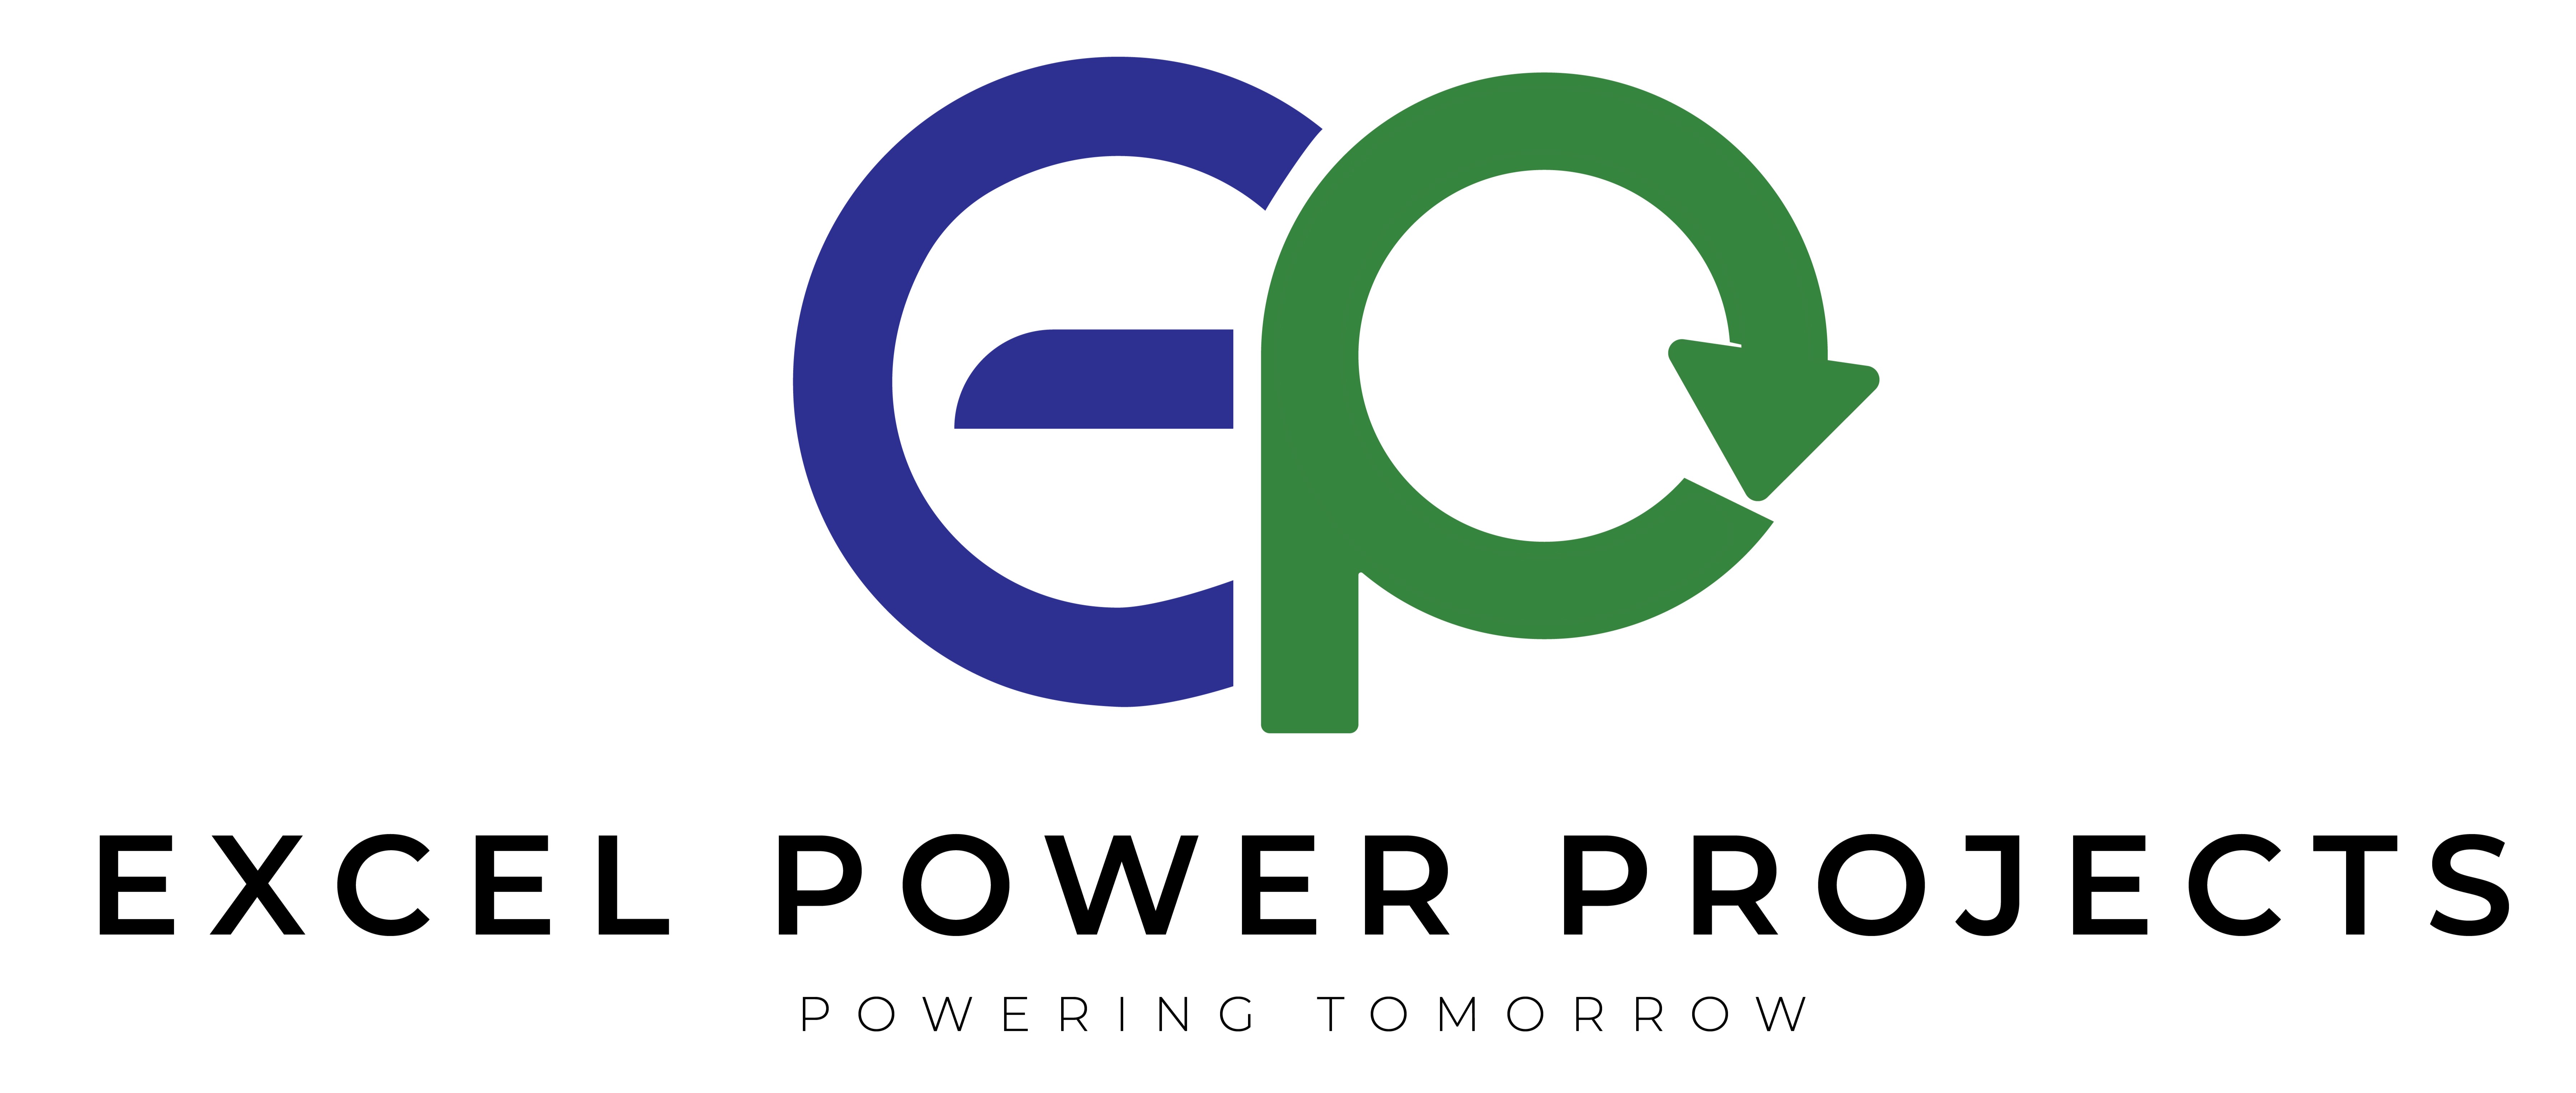 Excel Power Projects Logo